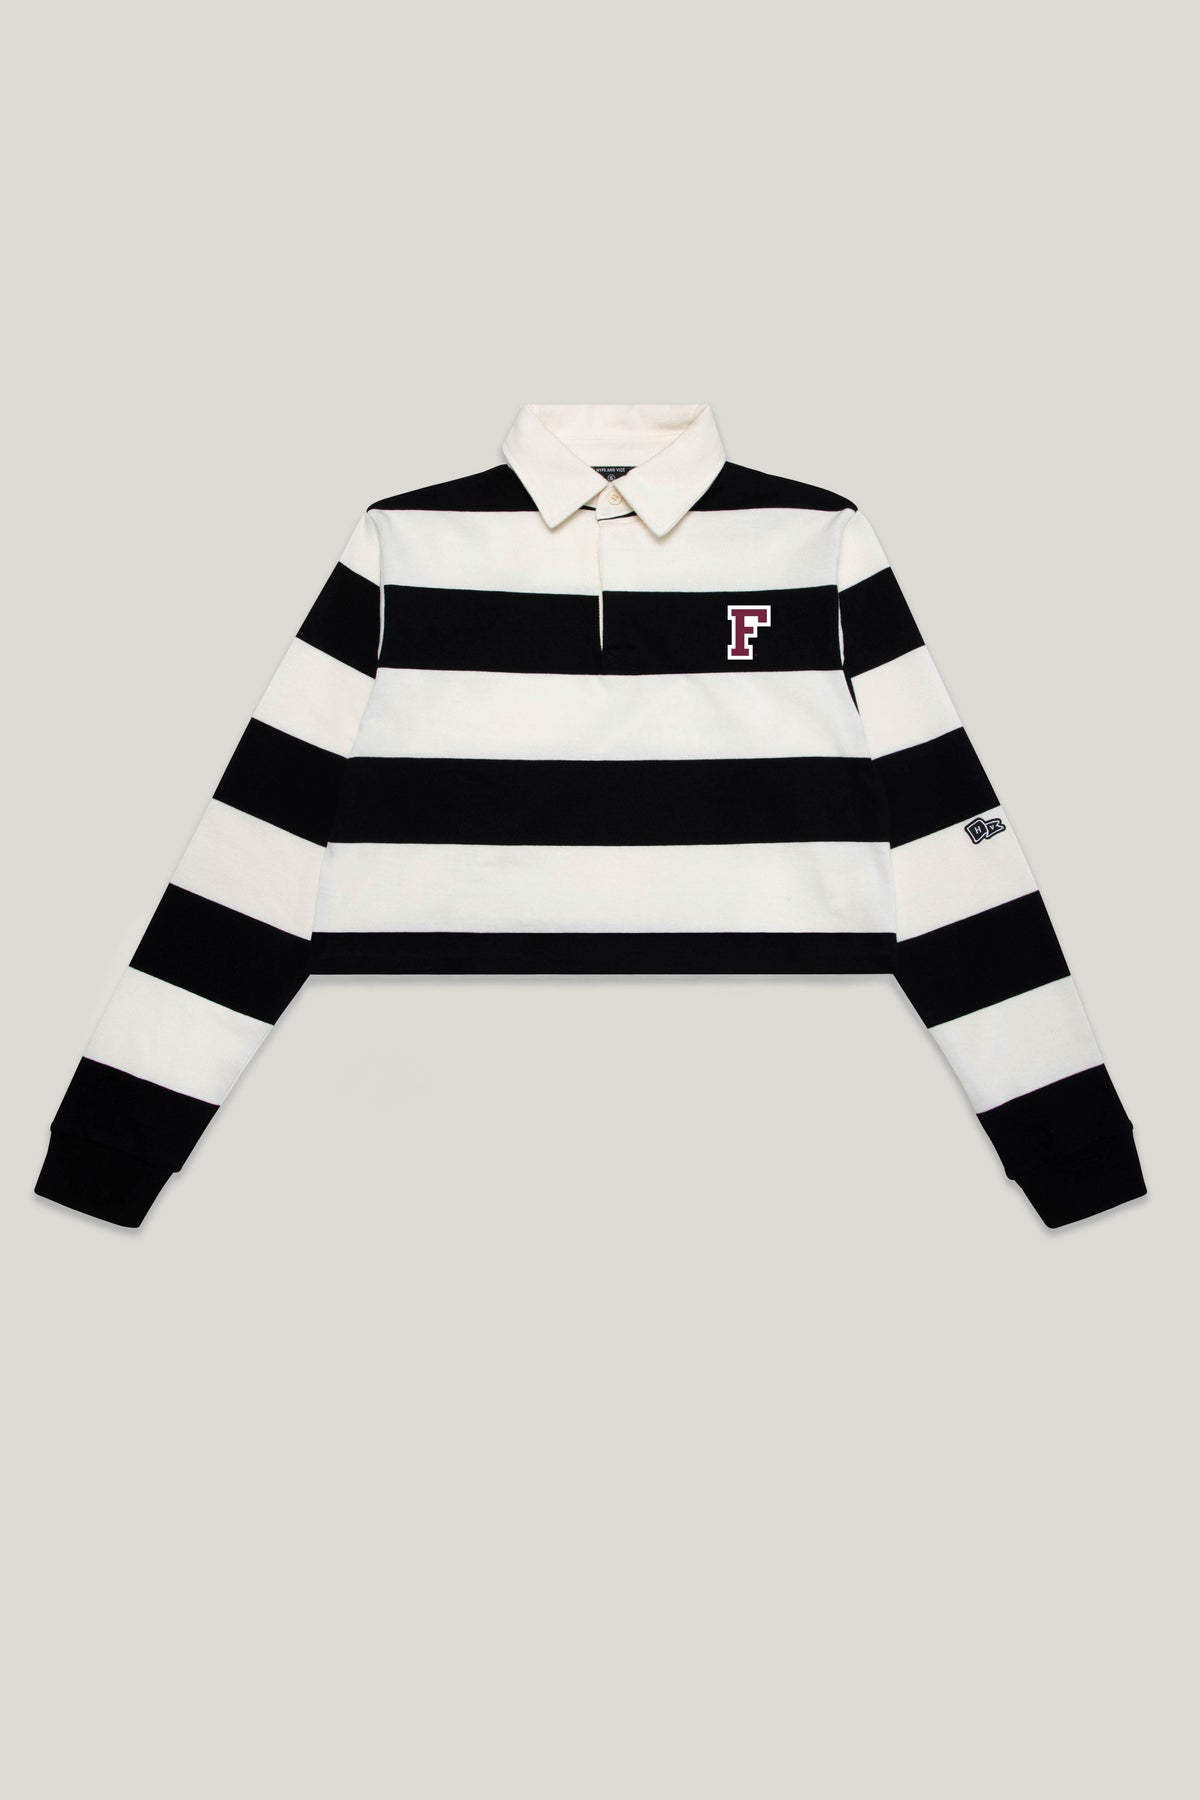 Fordham University Rugby Top